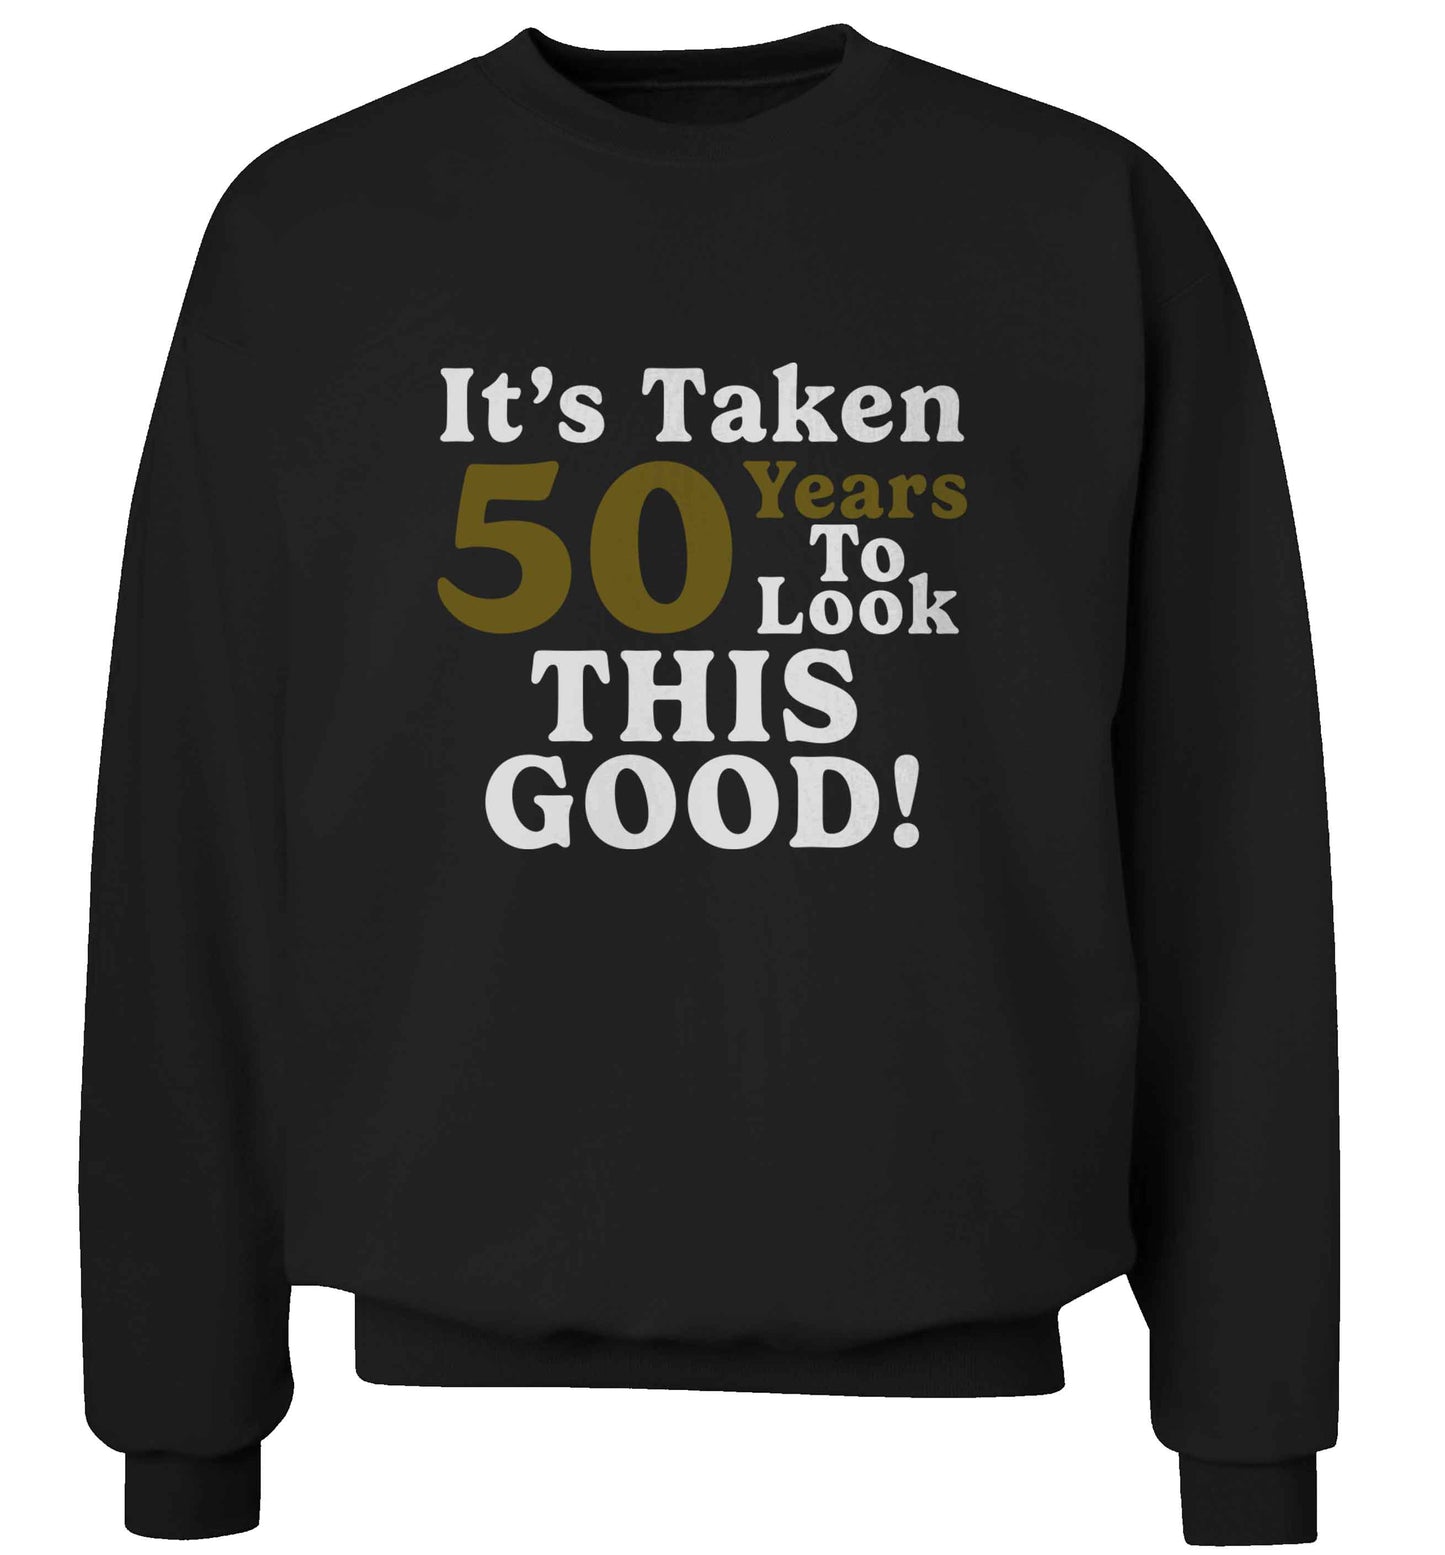 It's taken 50 years to look this good! adult's unisex black sweater 2XL